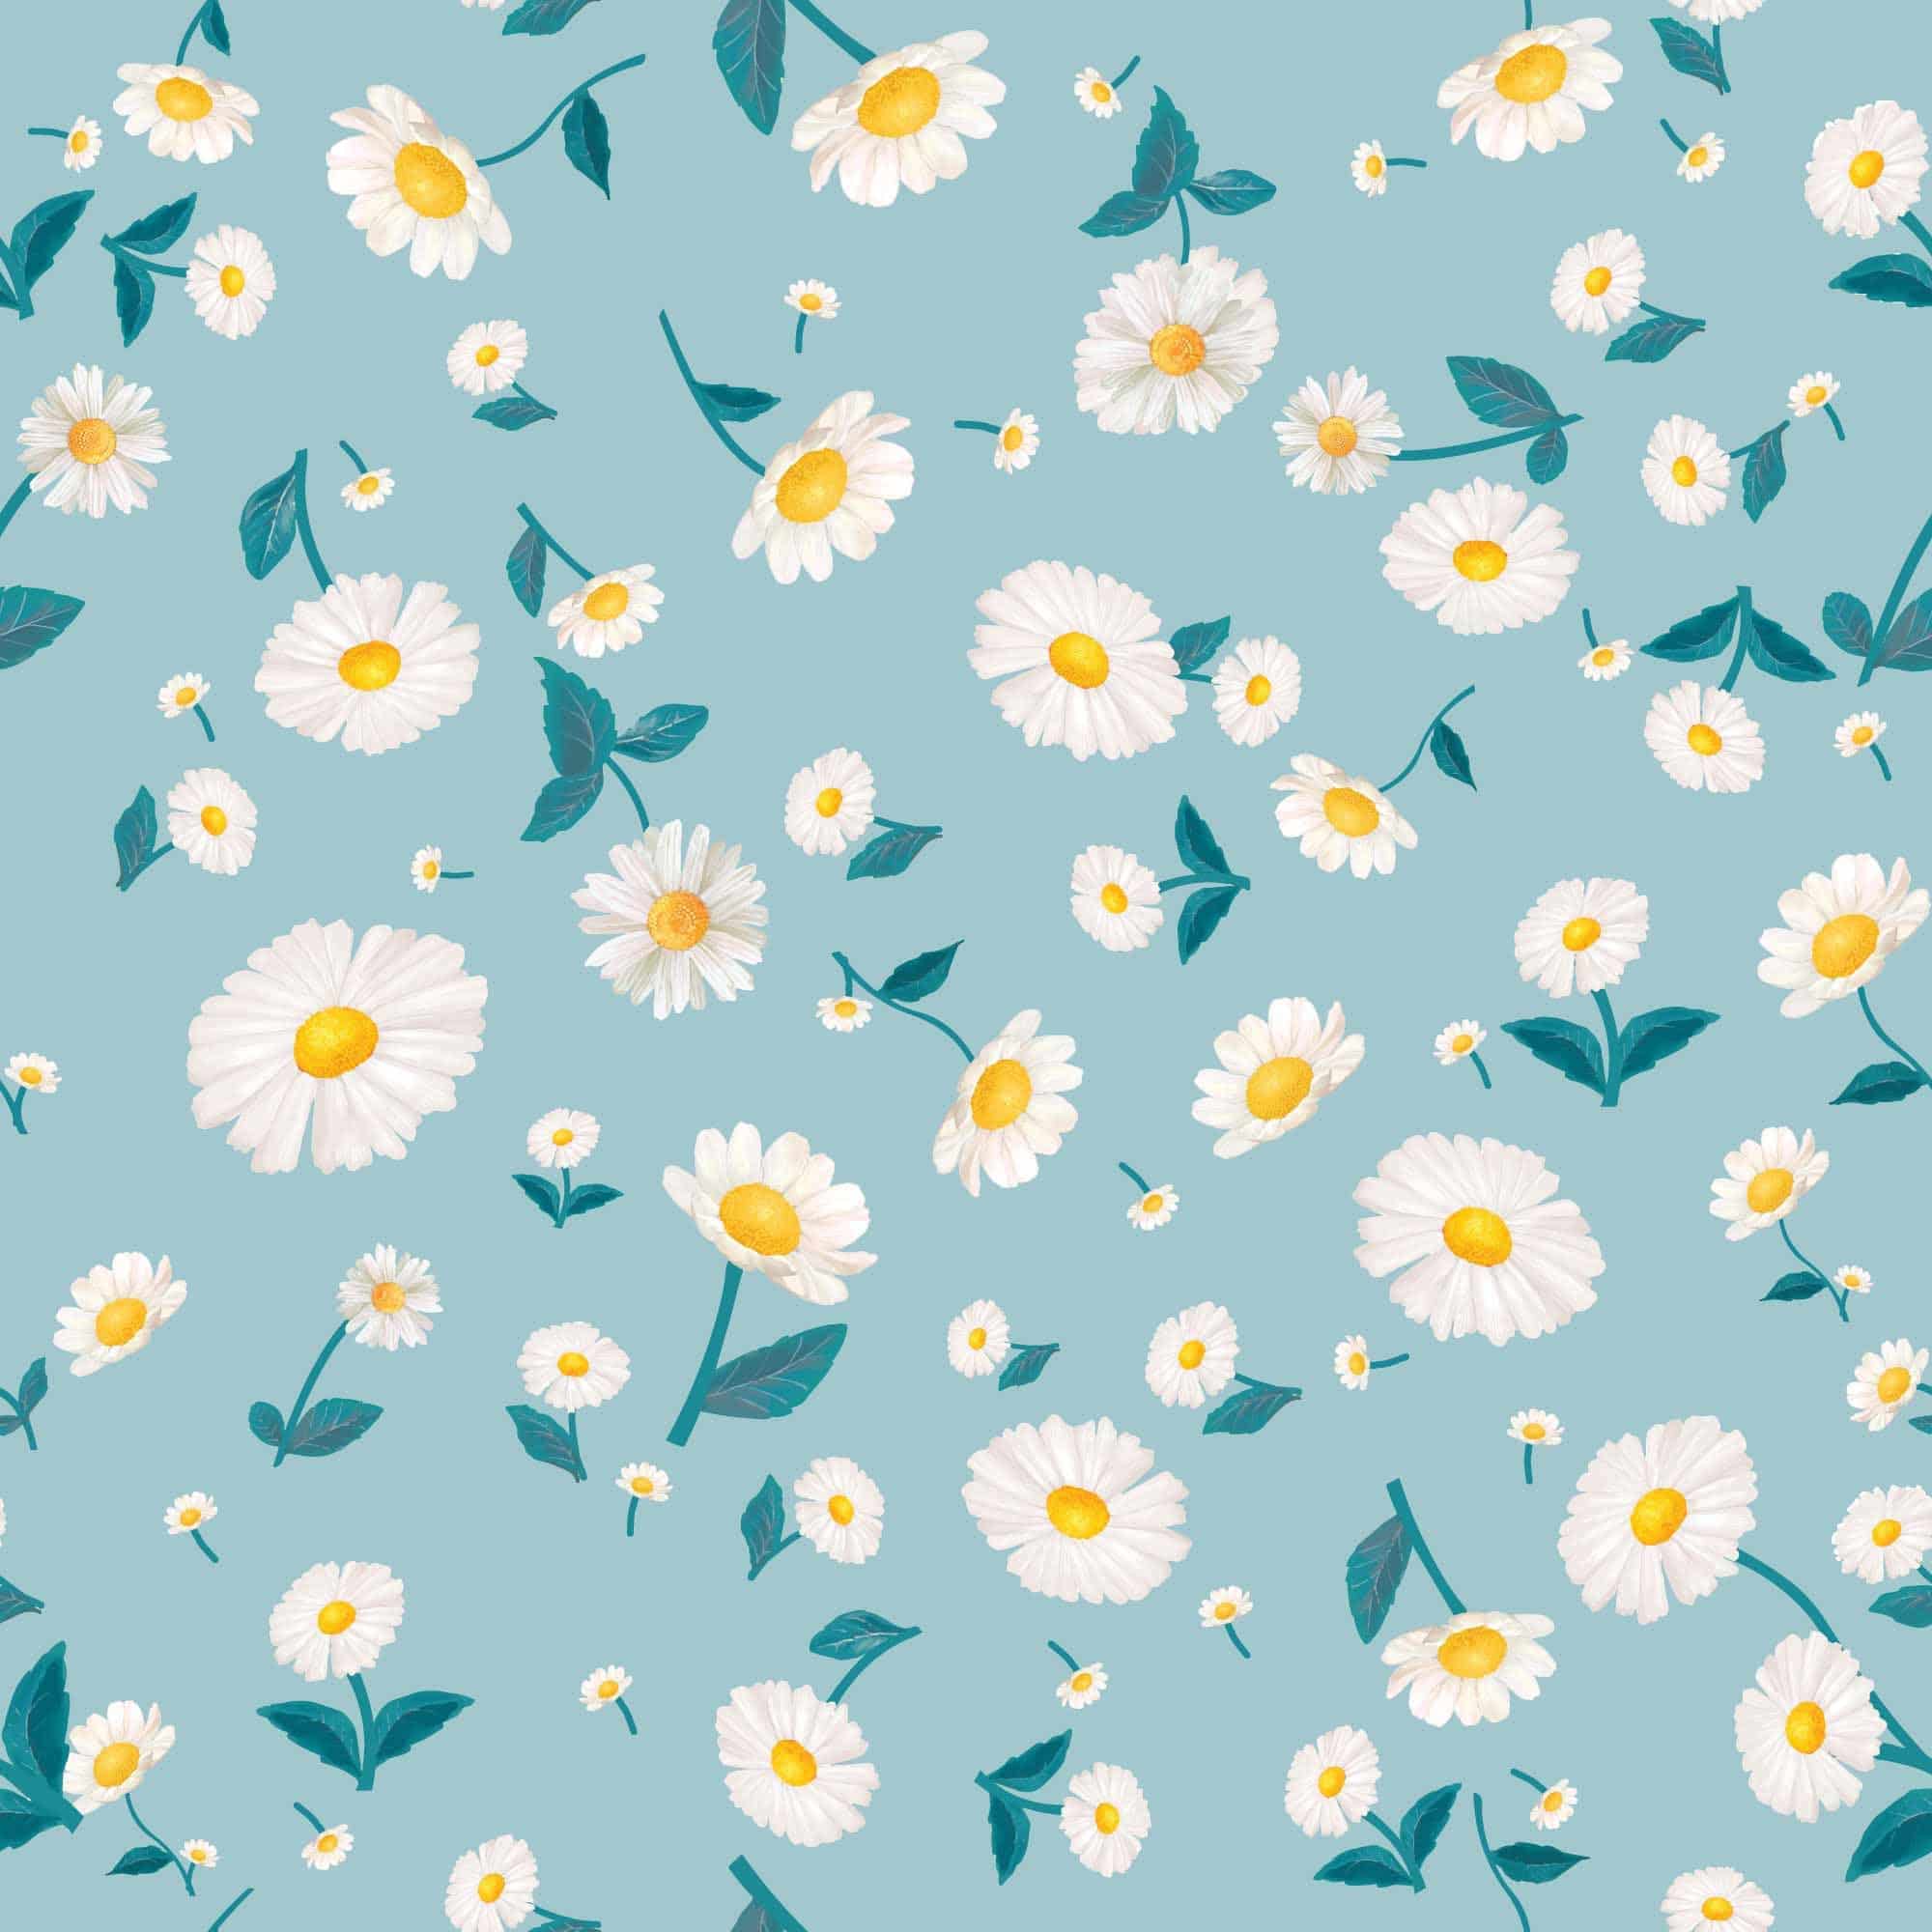 A pattern of white and yellow flowers on blue - Daisy